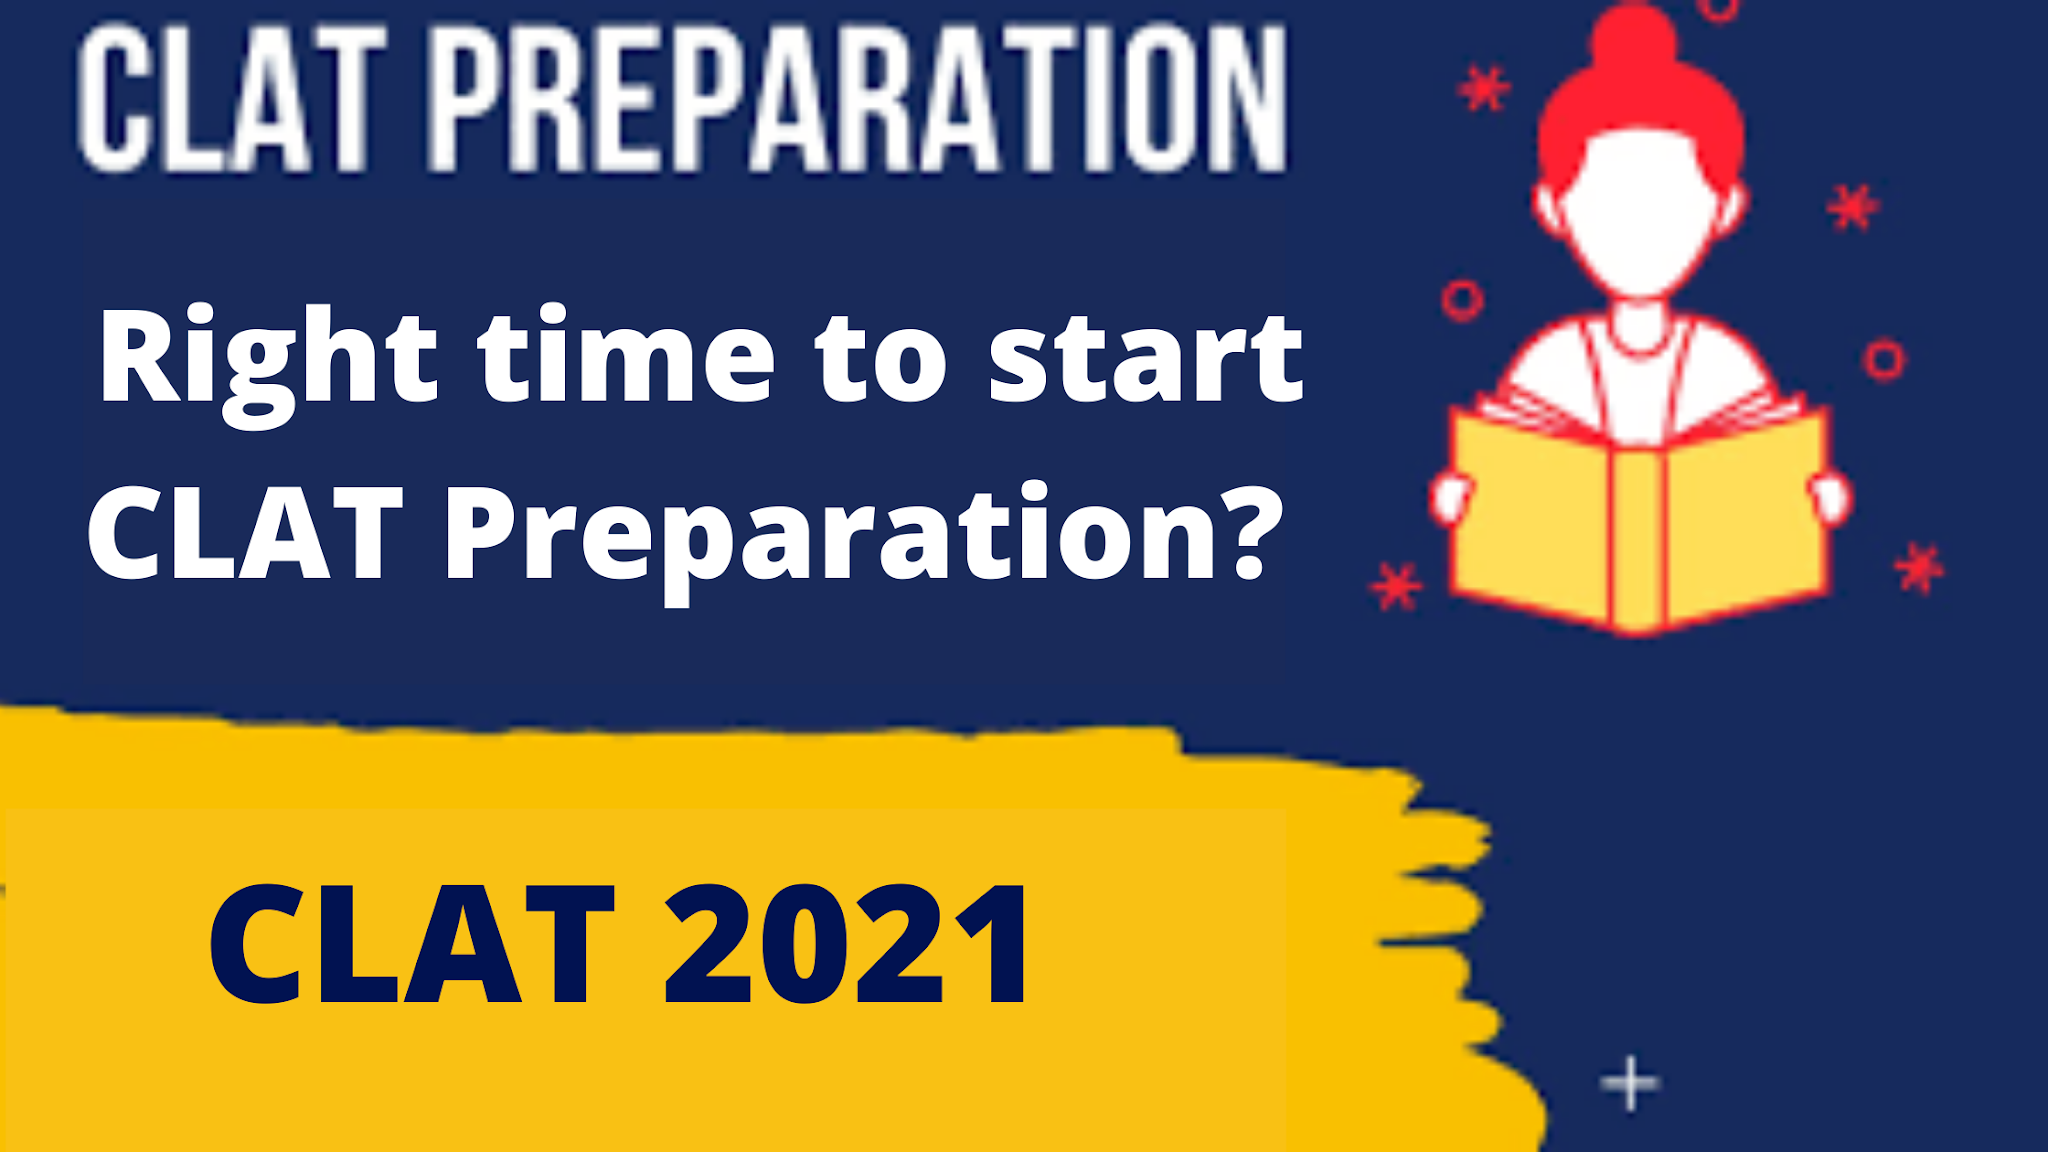 What is the right time to start CLAT Preparation?